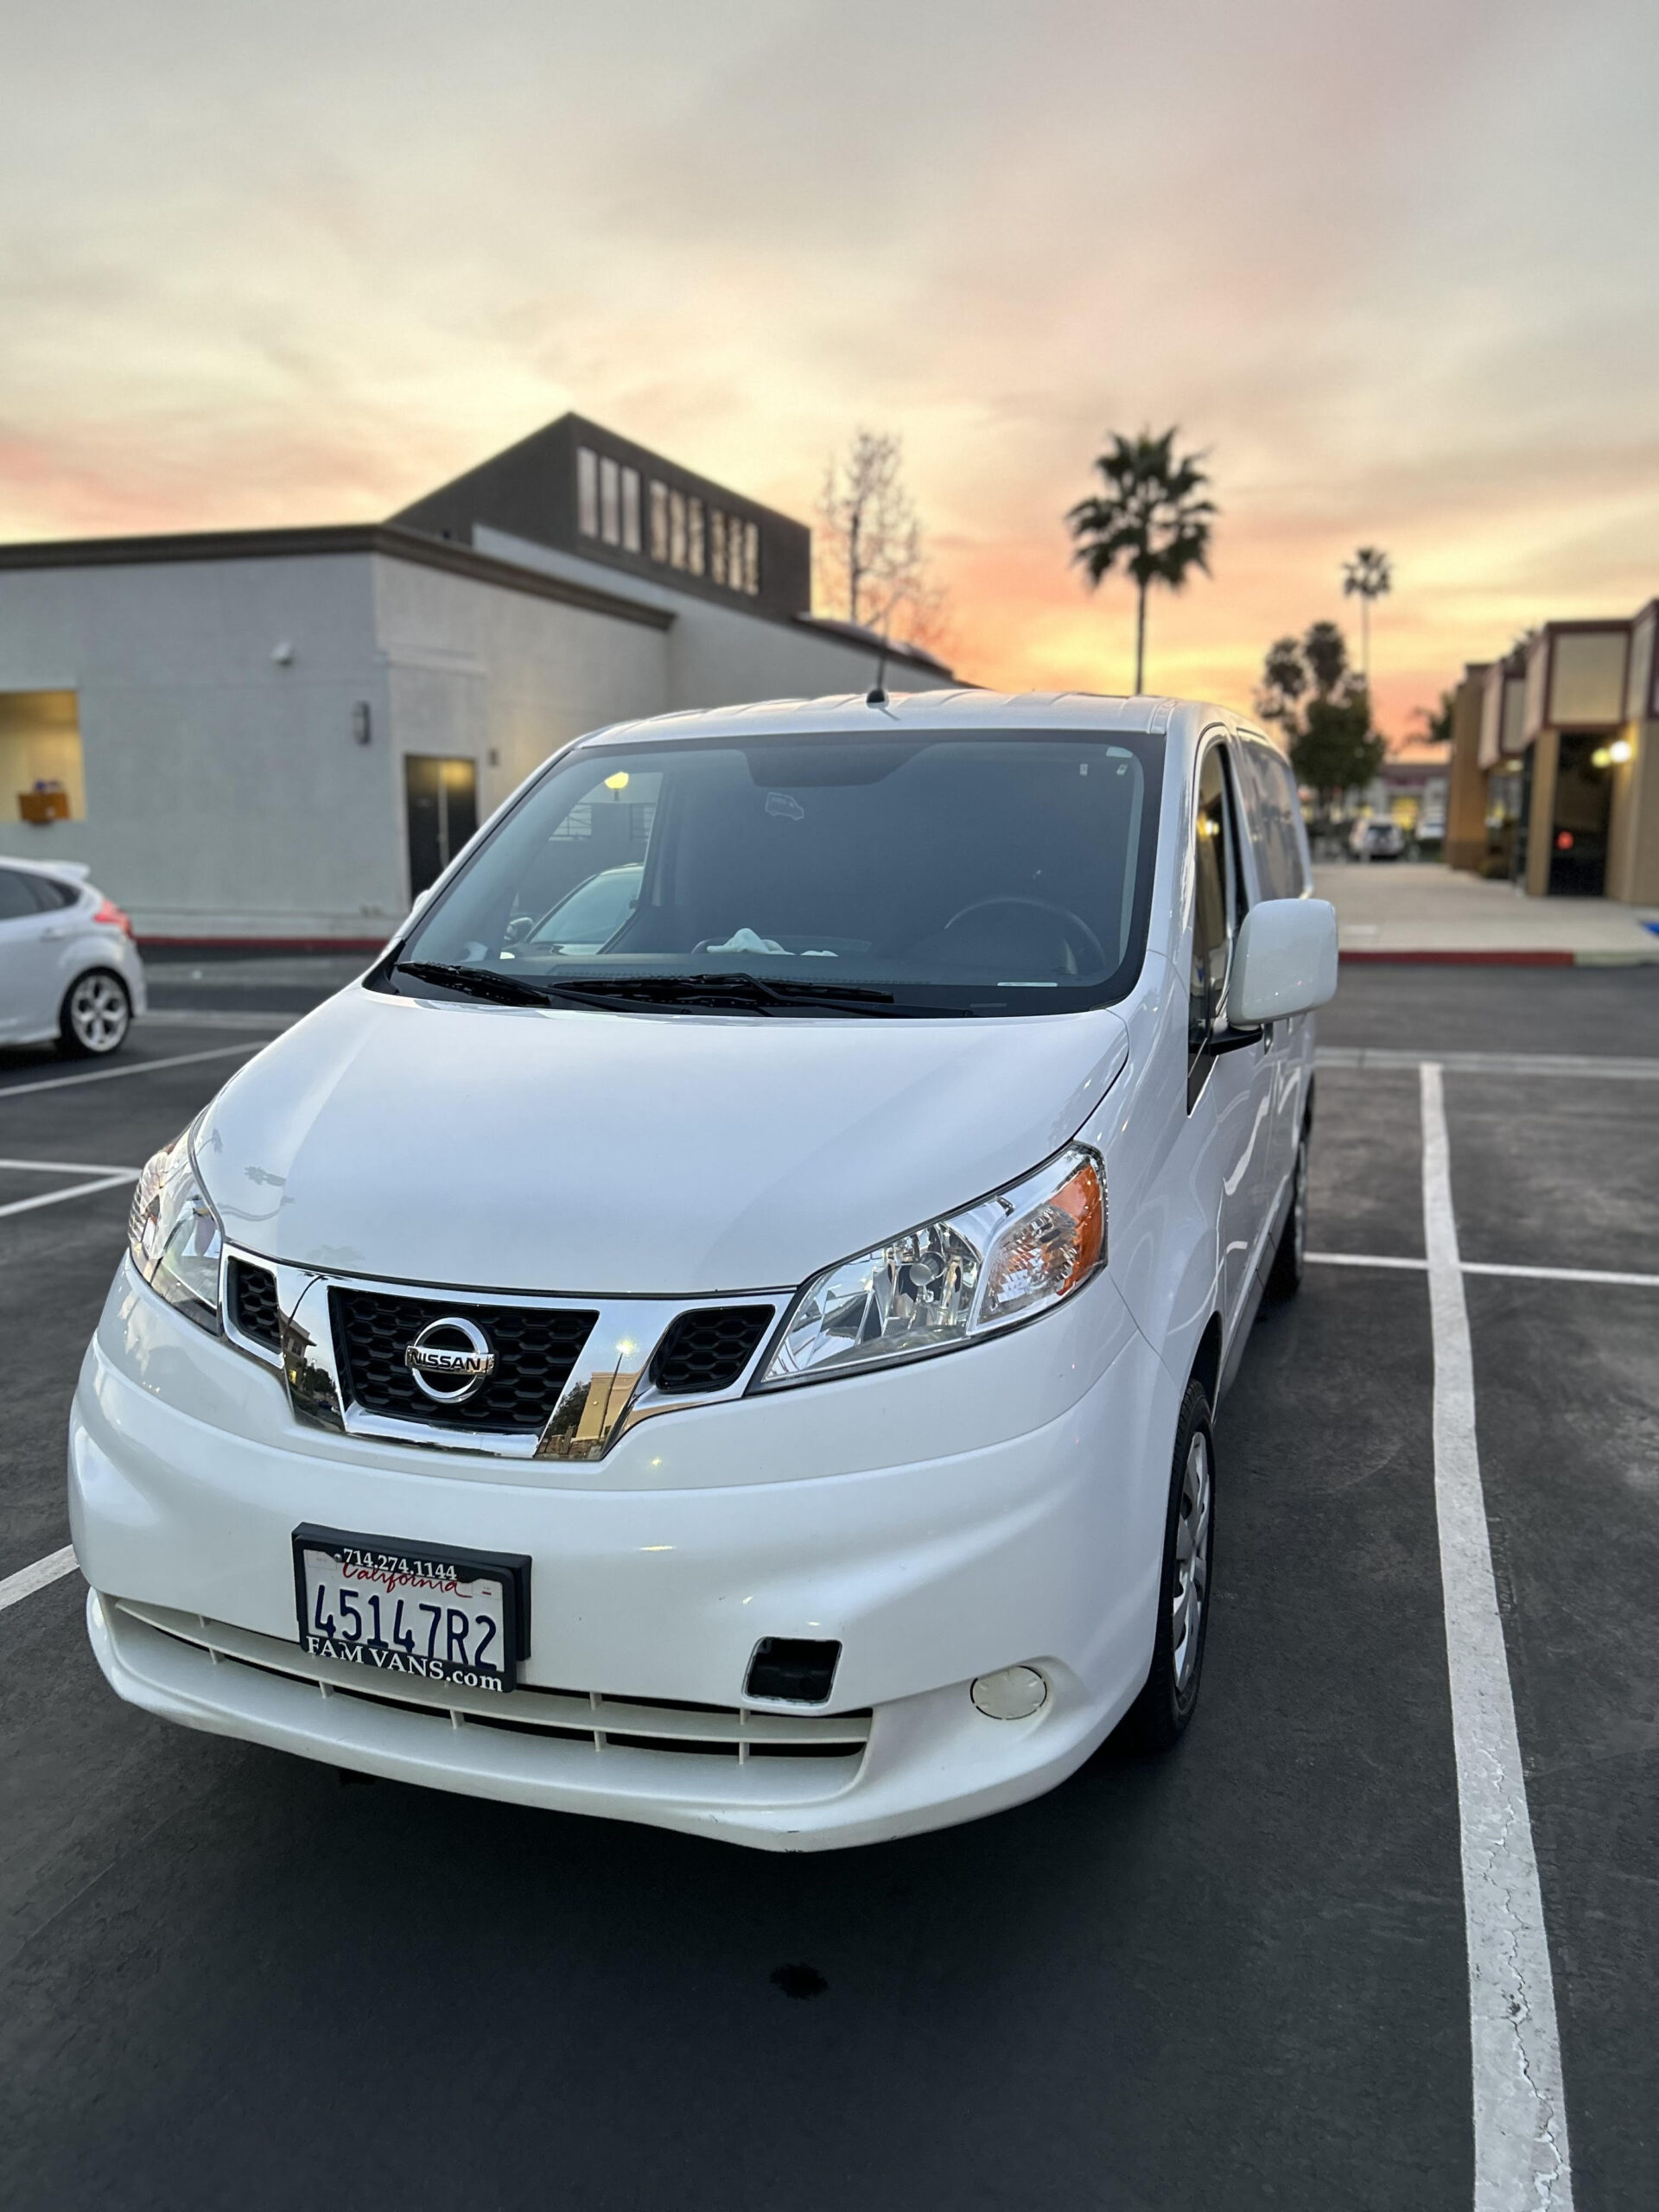 Clean White Nissan Van with beautiful sunset background and palm trees.